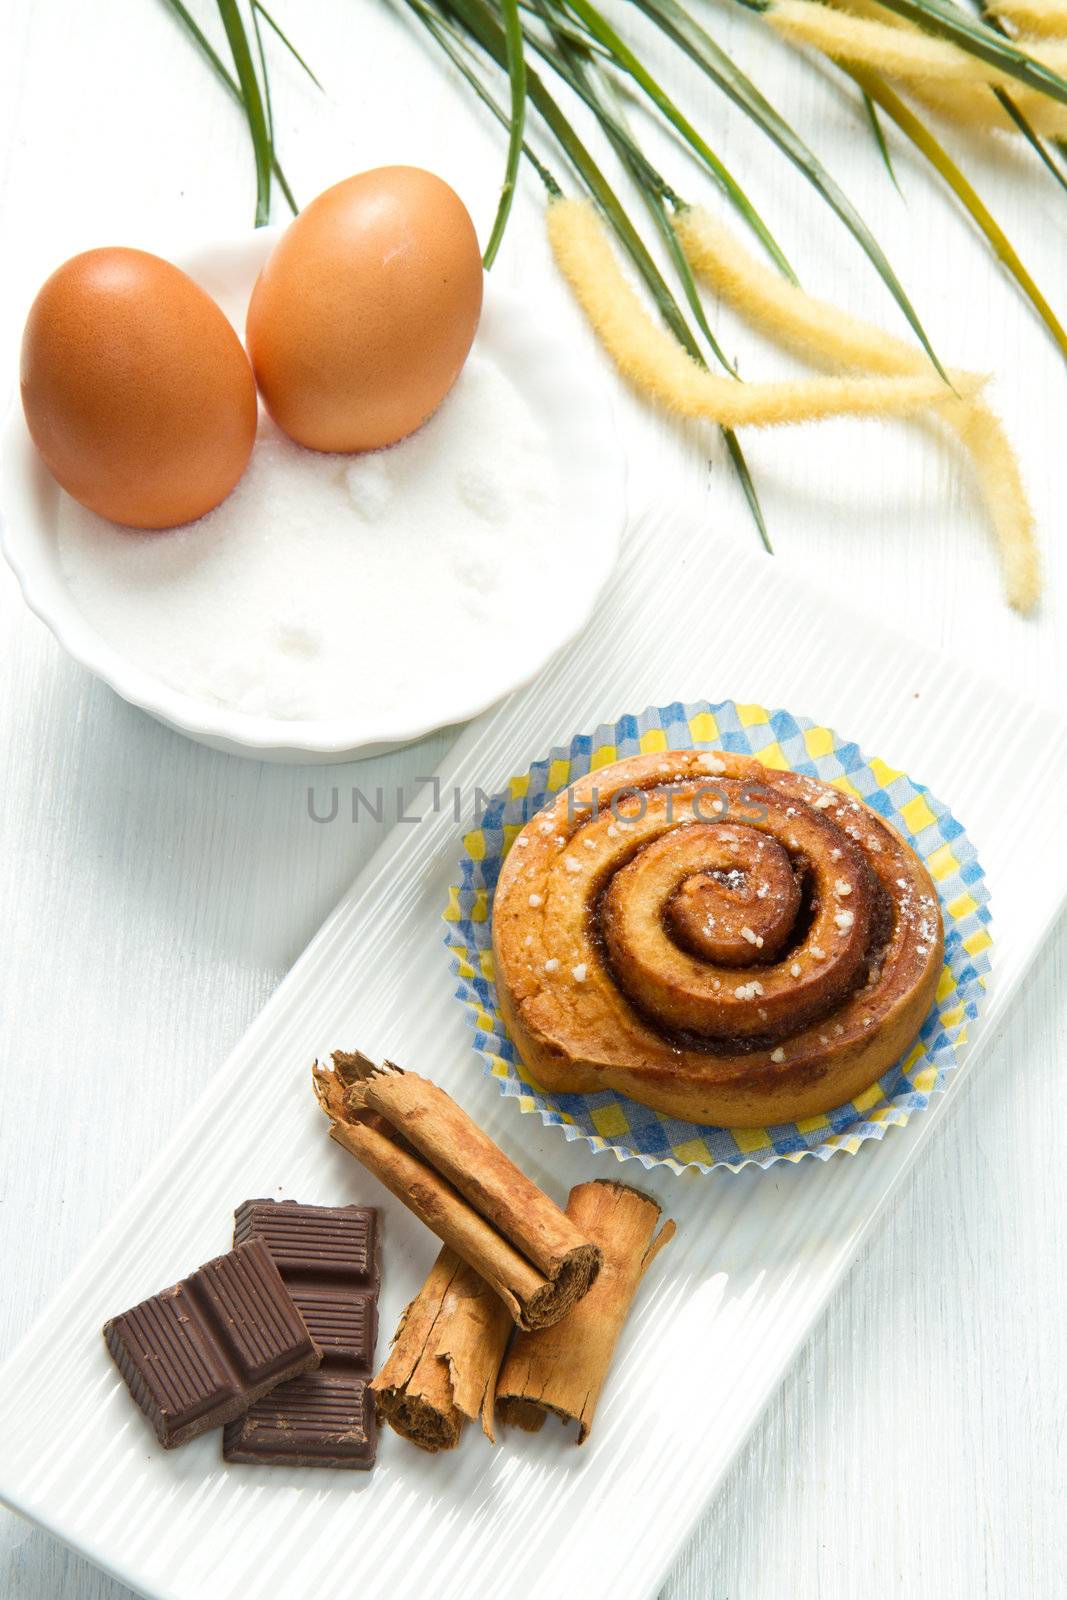 delicious  pastries with chocolate and cinnamon